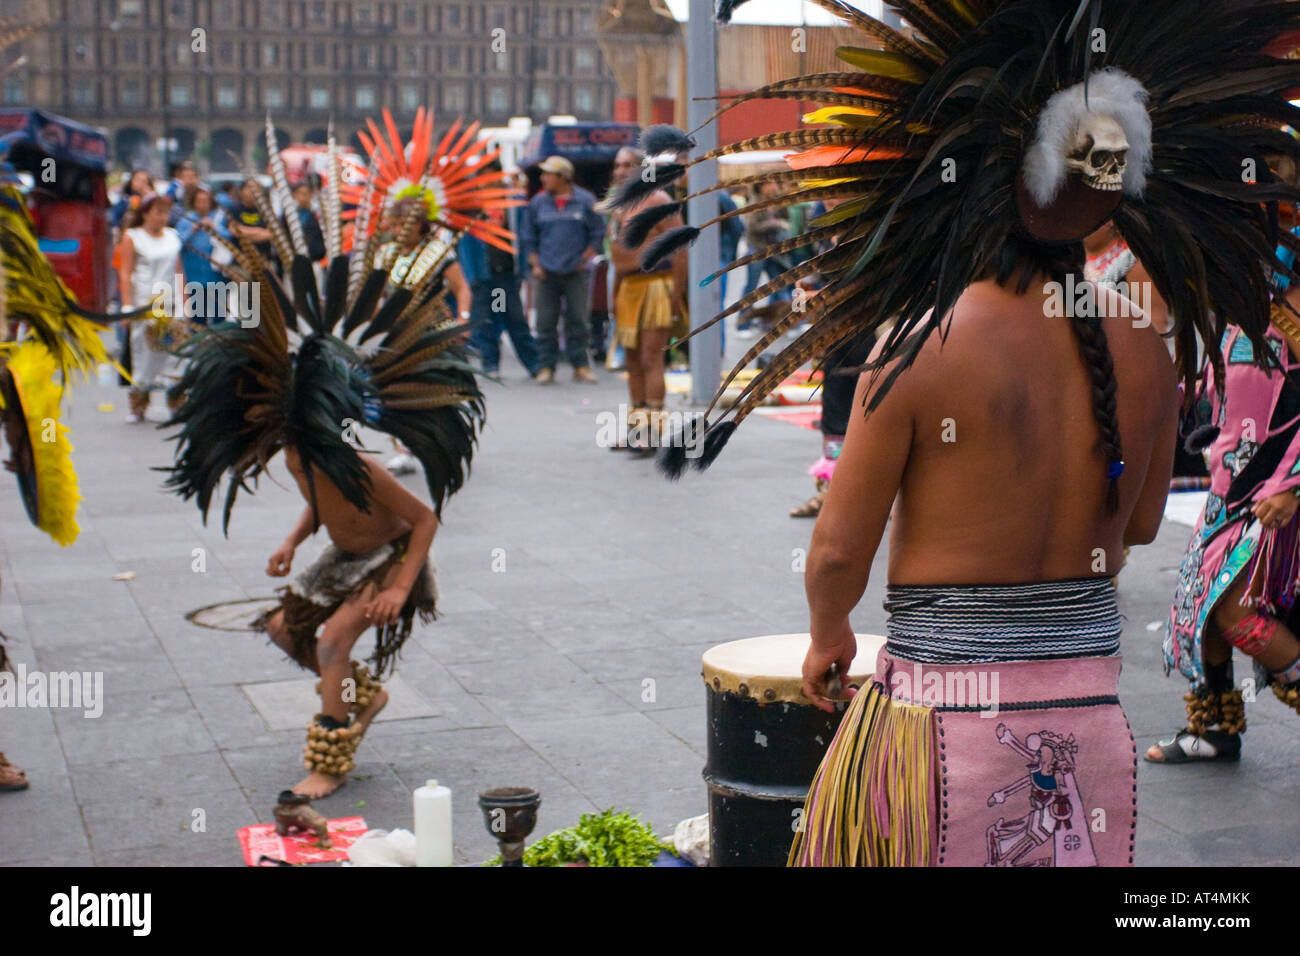 Aztec dancers dancing in the Zocalo in Mexico City, DF, Mexico. Stock Photo